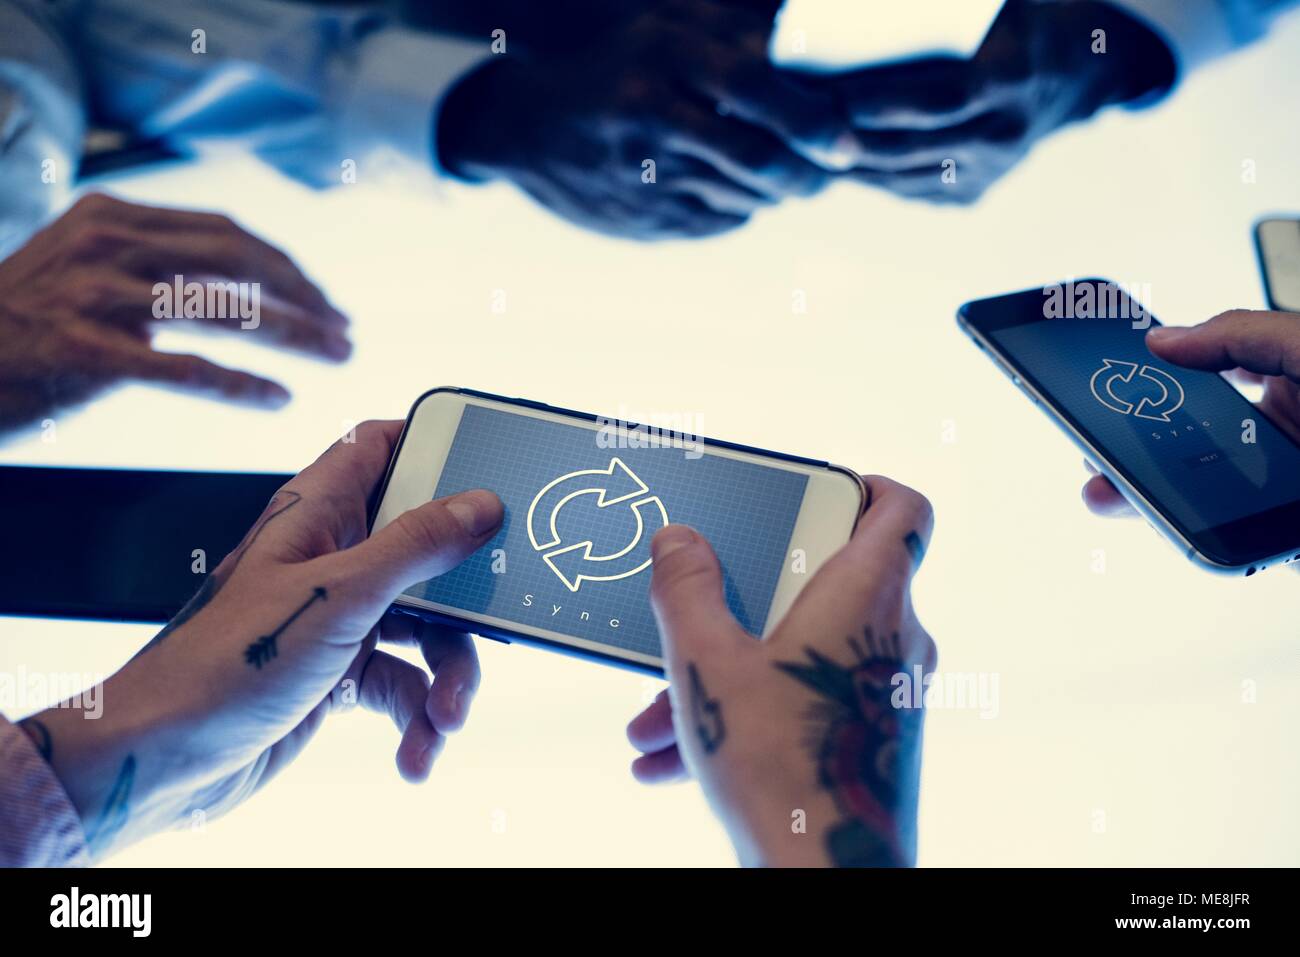 Hands holding smartphone with sync symbol on a screen Stock Photo